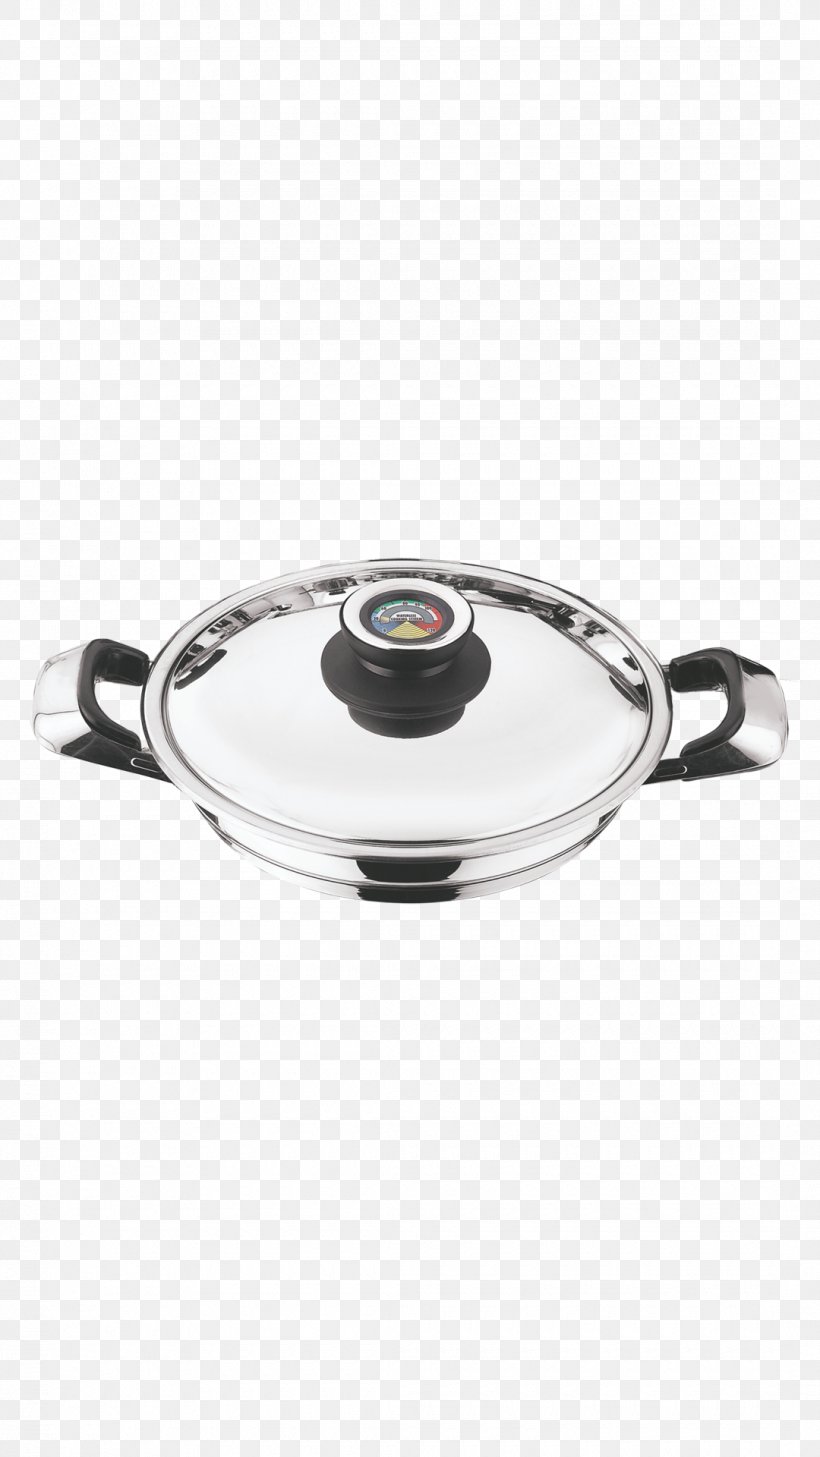 Frying Pan Tableware Silver Lid, PNG, 1080x1920px, Frying Pan, Cookware, Cookware Accessory, Cookware And Bakeware, Frying Download Free